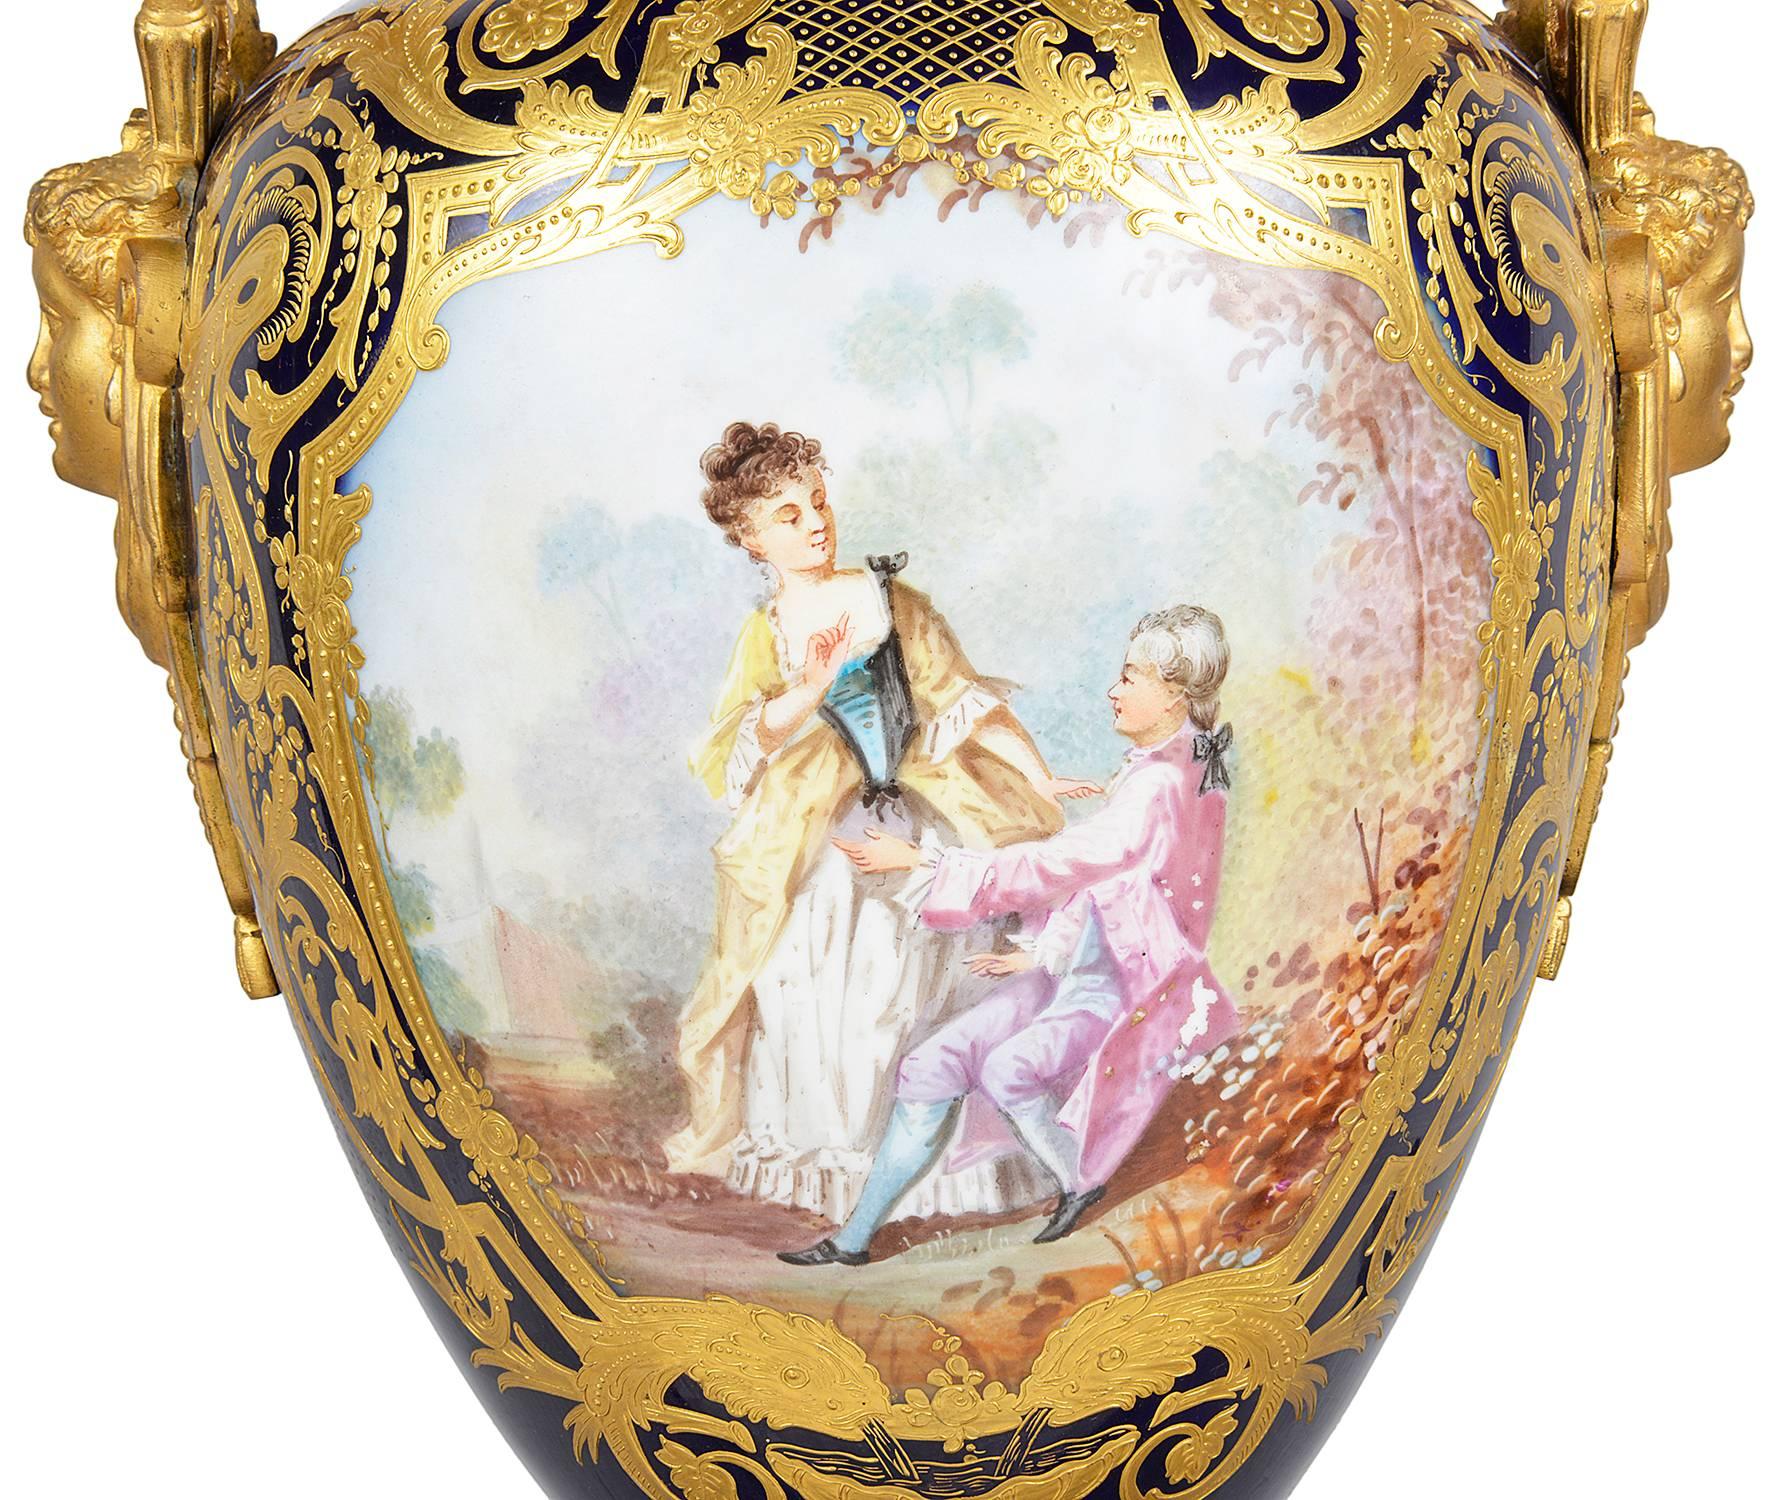 A very good quality late 19th century French 'Sèvres' lidded vase. Having gilded ormolu-mounted to the cobalt blue background with scrolling gilded decoration. The painted panel to the front depicting a classical romantic scene.